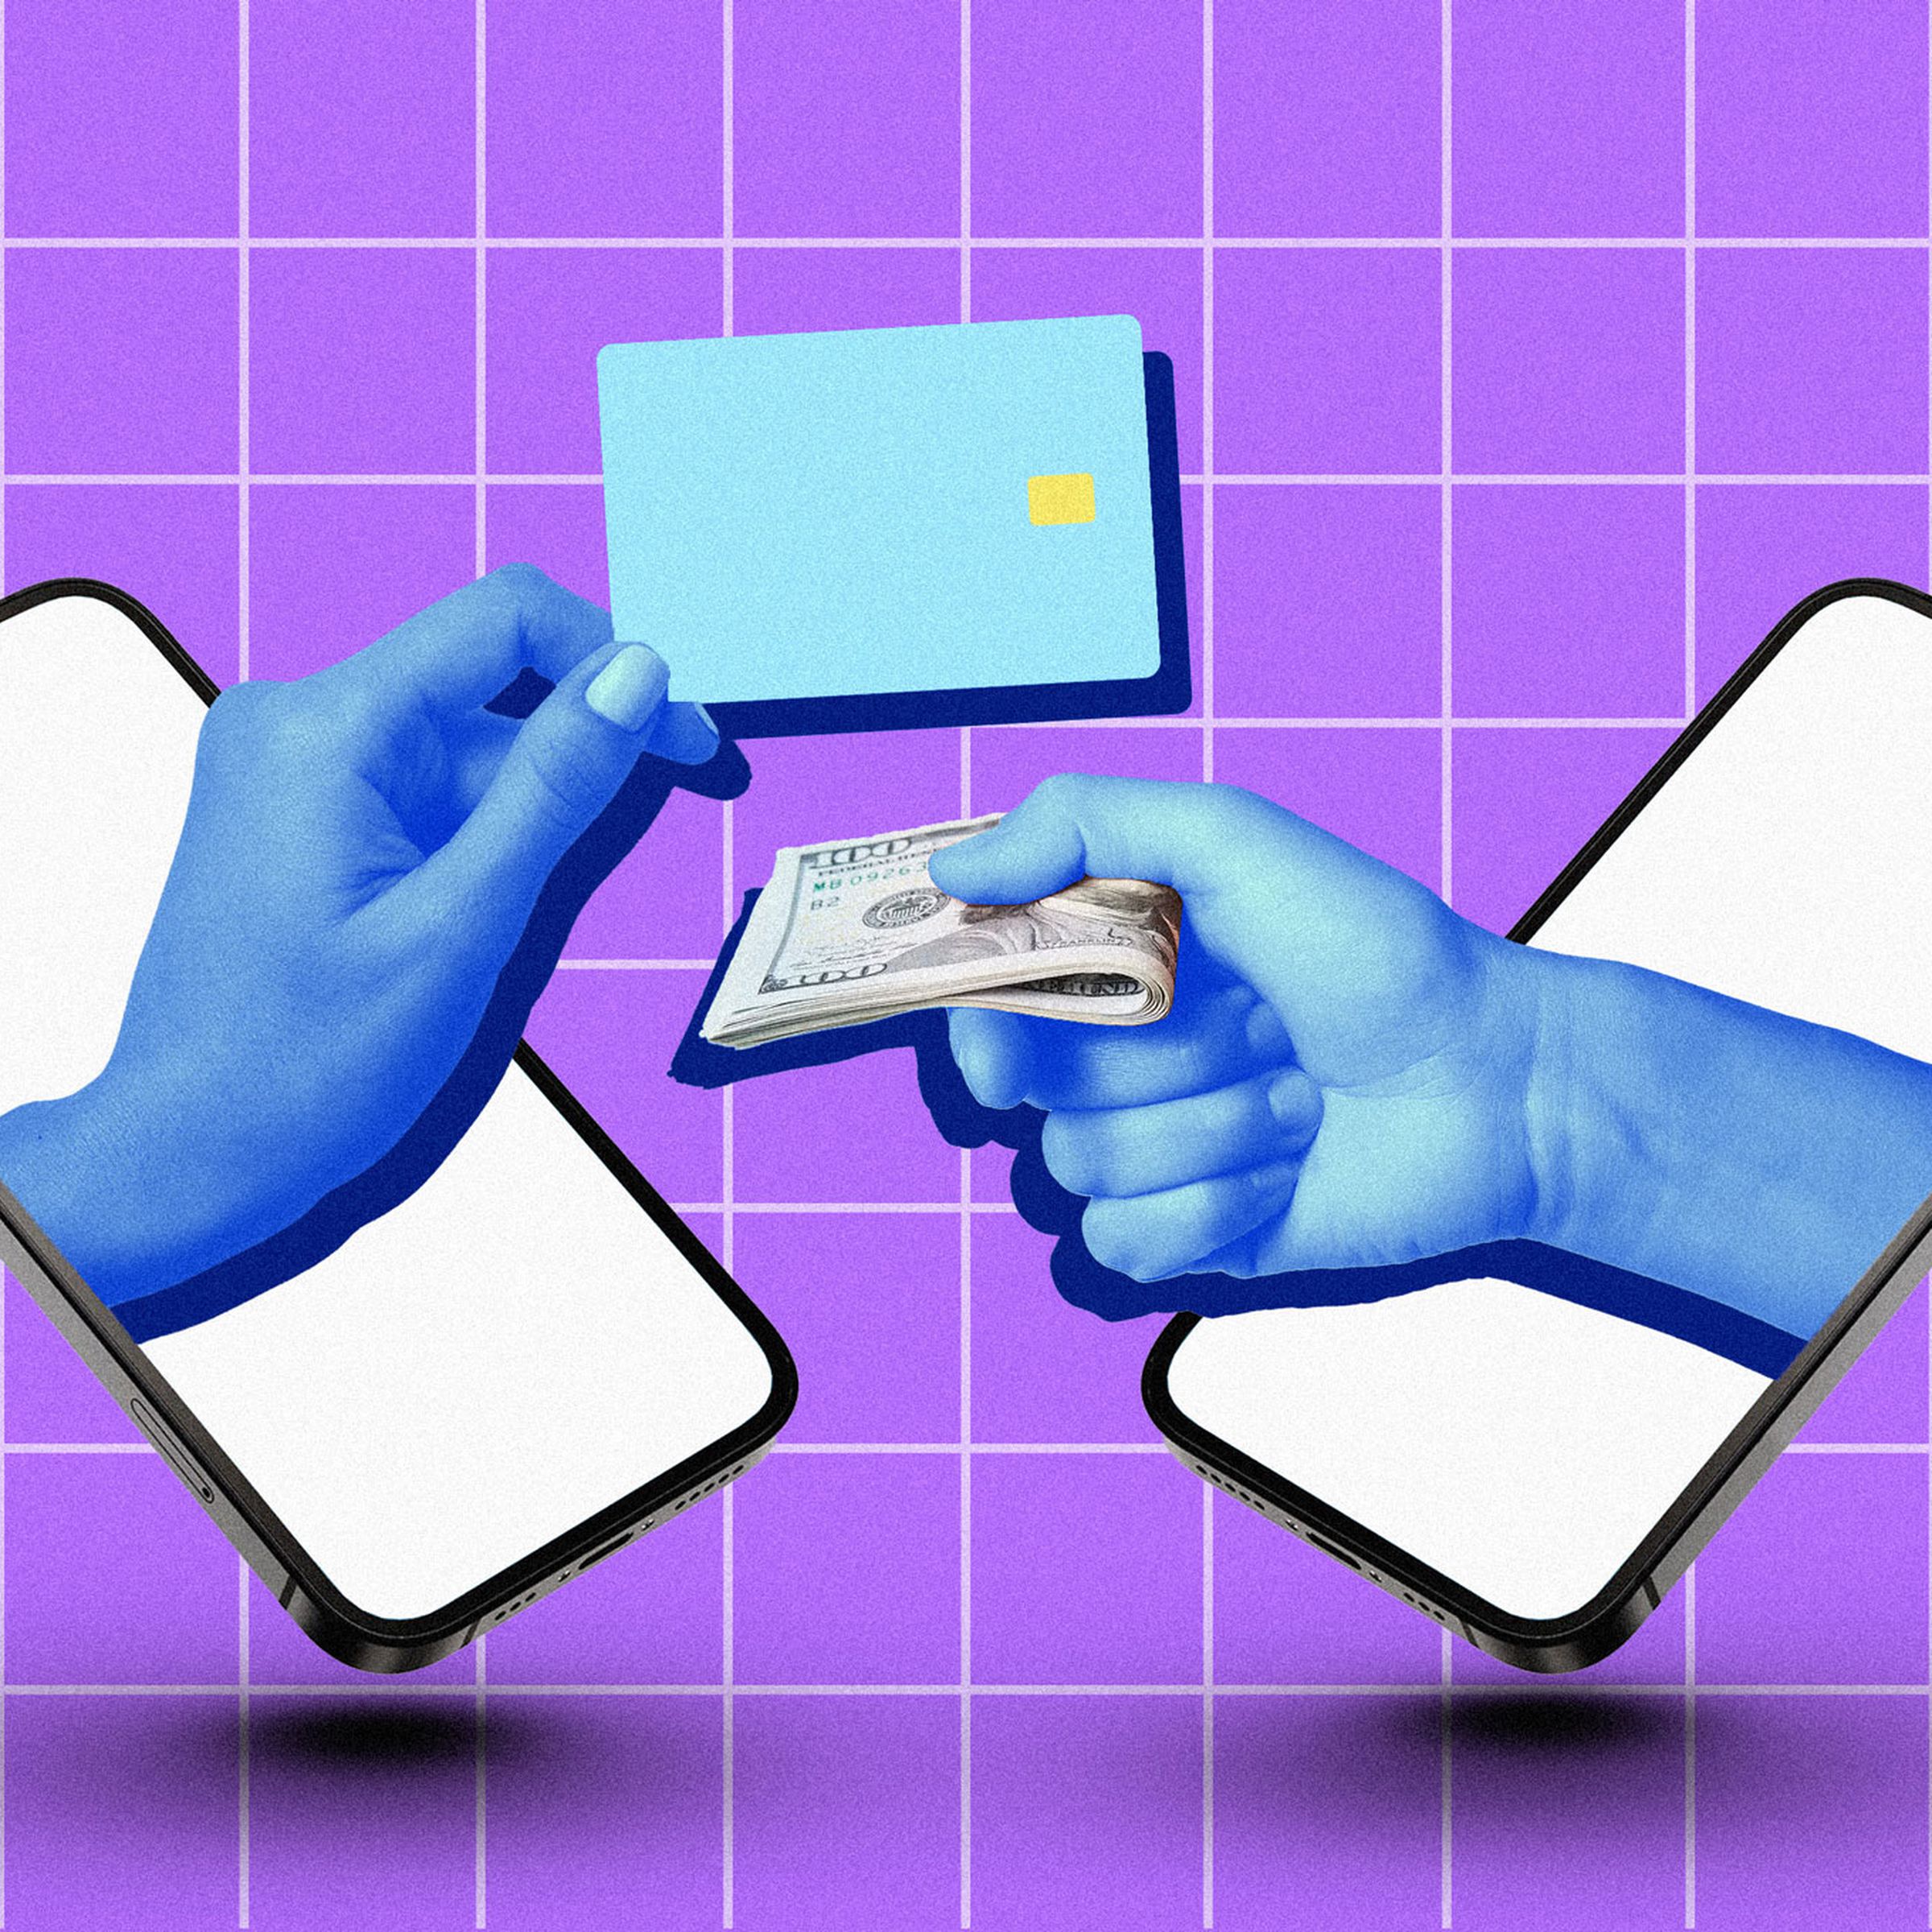 An illustration of two hands emerging from phones, one holding a credit card and one holding cash.